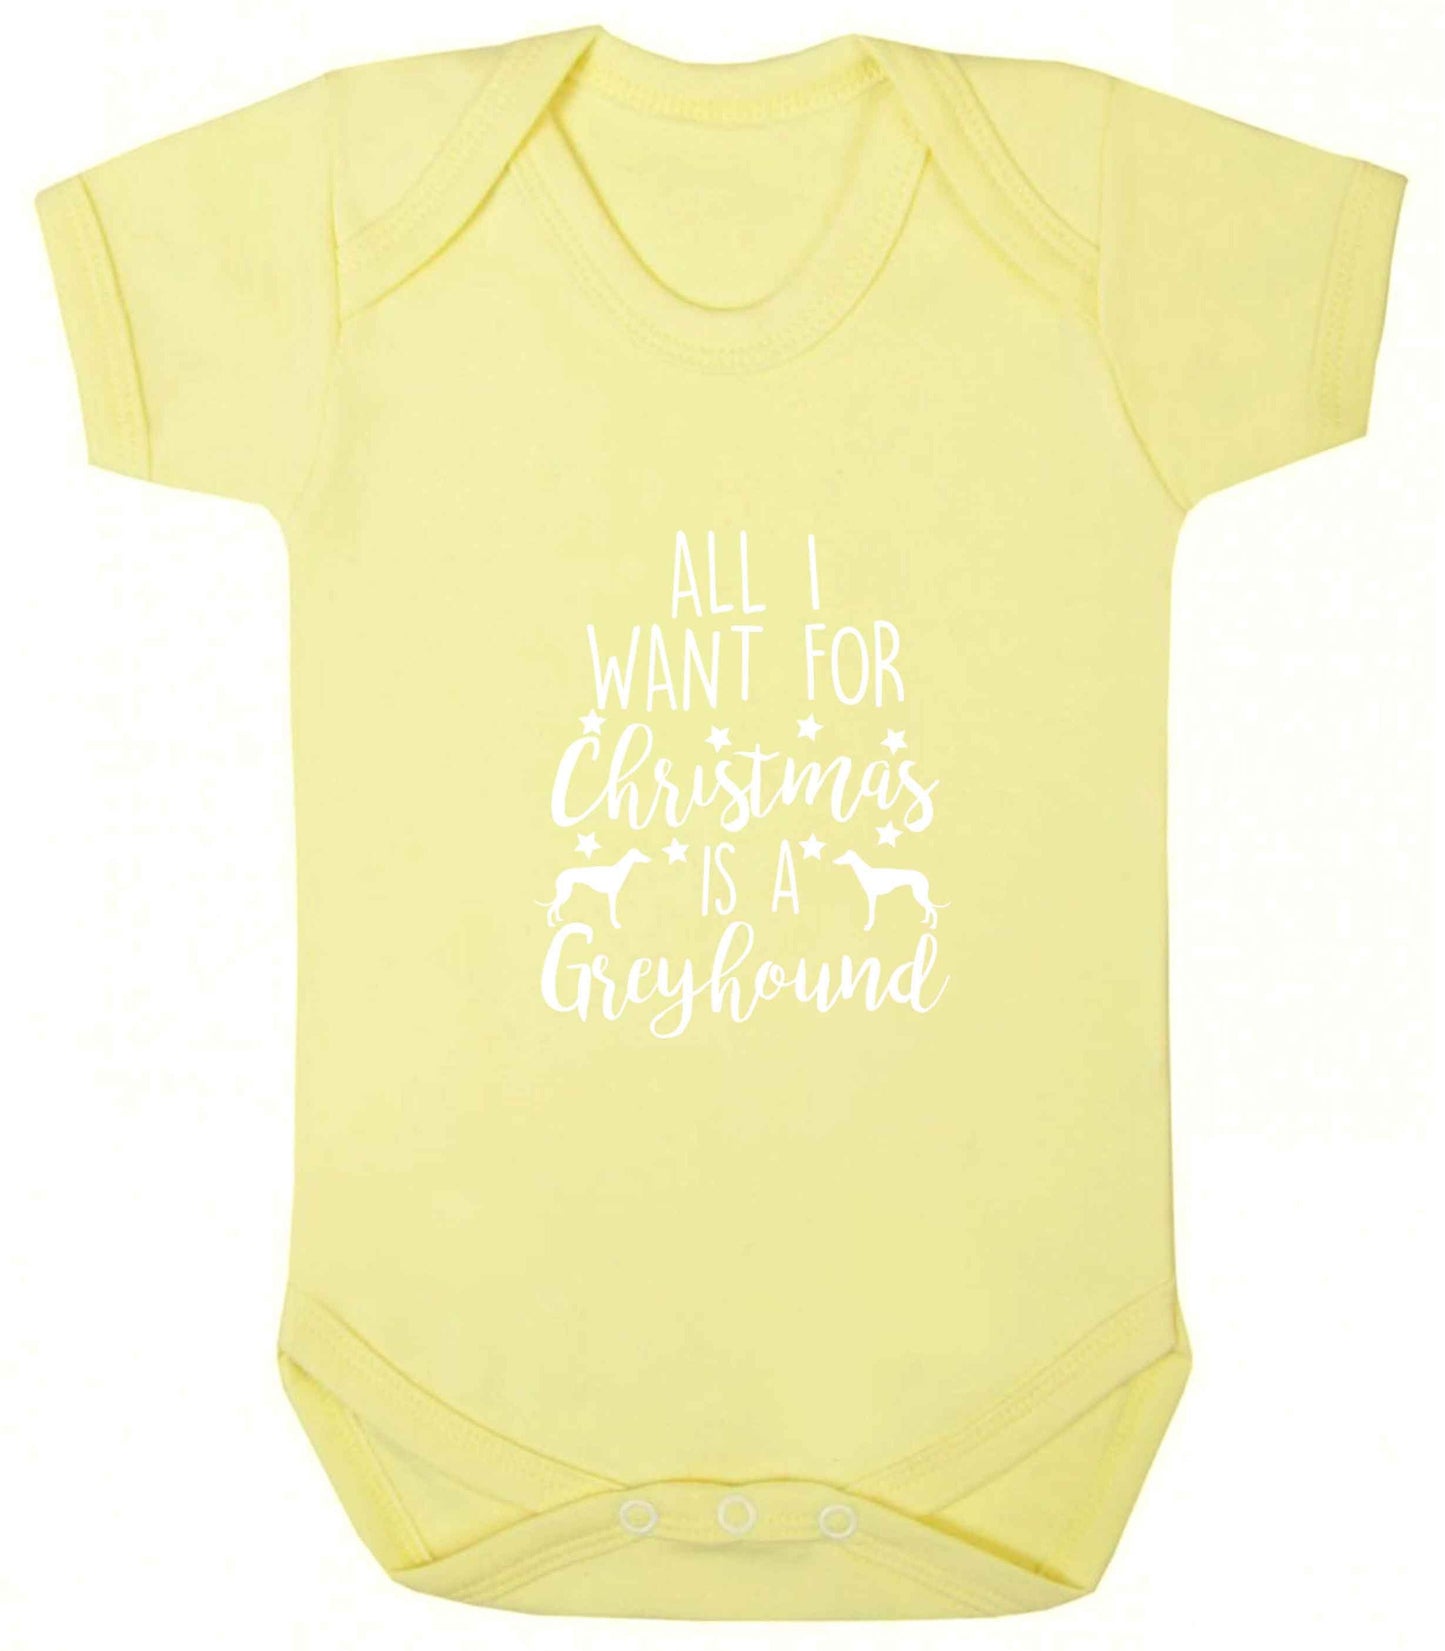 All I want for Christmas is a greyhound baby vest pale yellow 18-24 months